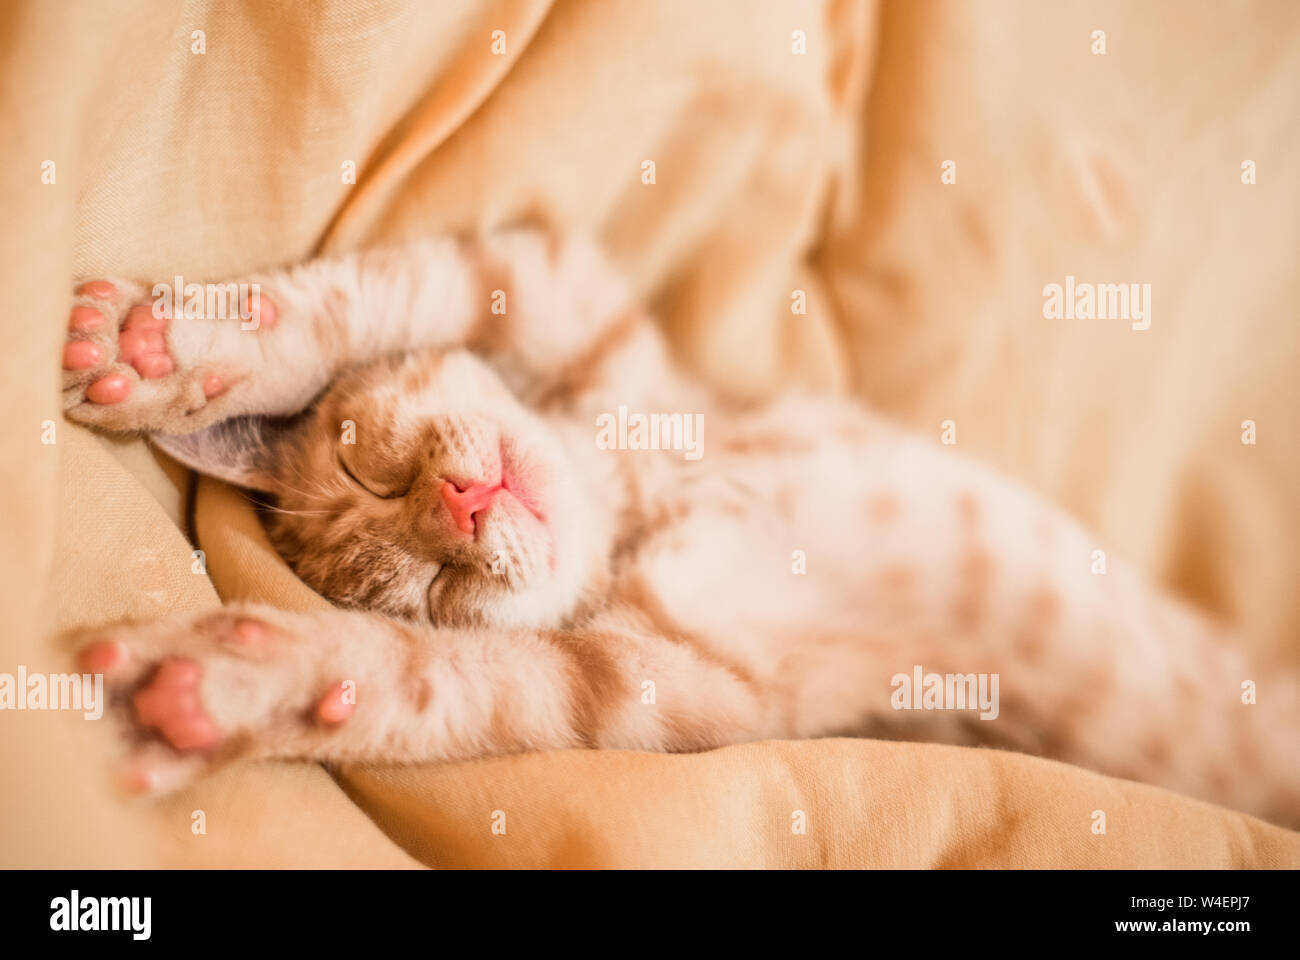 Close up of a cute orange tabby kitty cat sleeping Banque D'Images